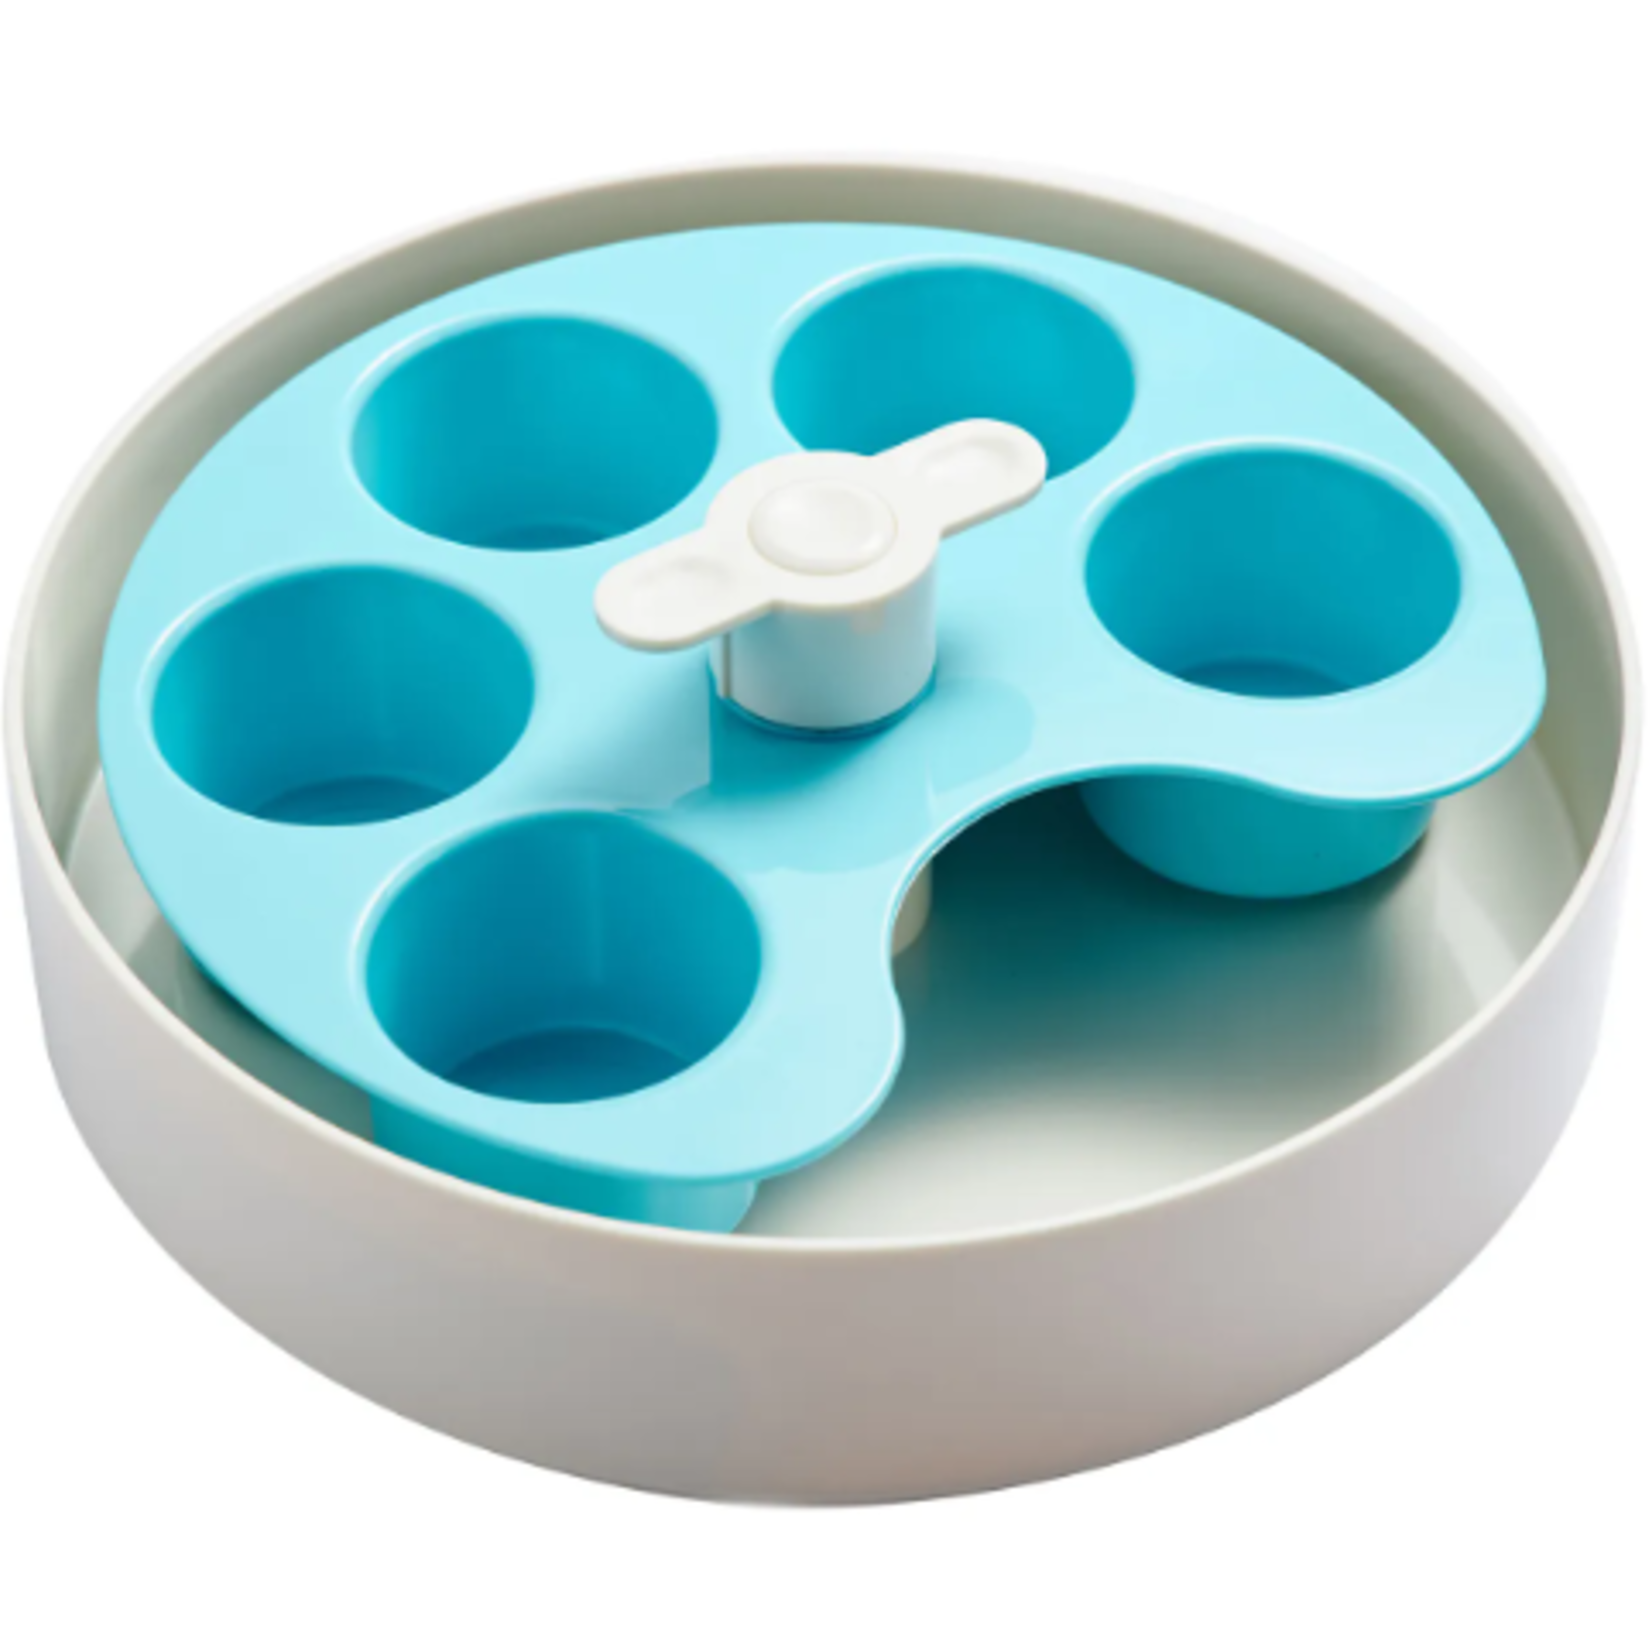 PDHF SPIN Interactive Slow Feeder Pet Bowl - Blue - 25 x 9.2 cm